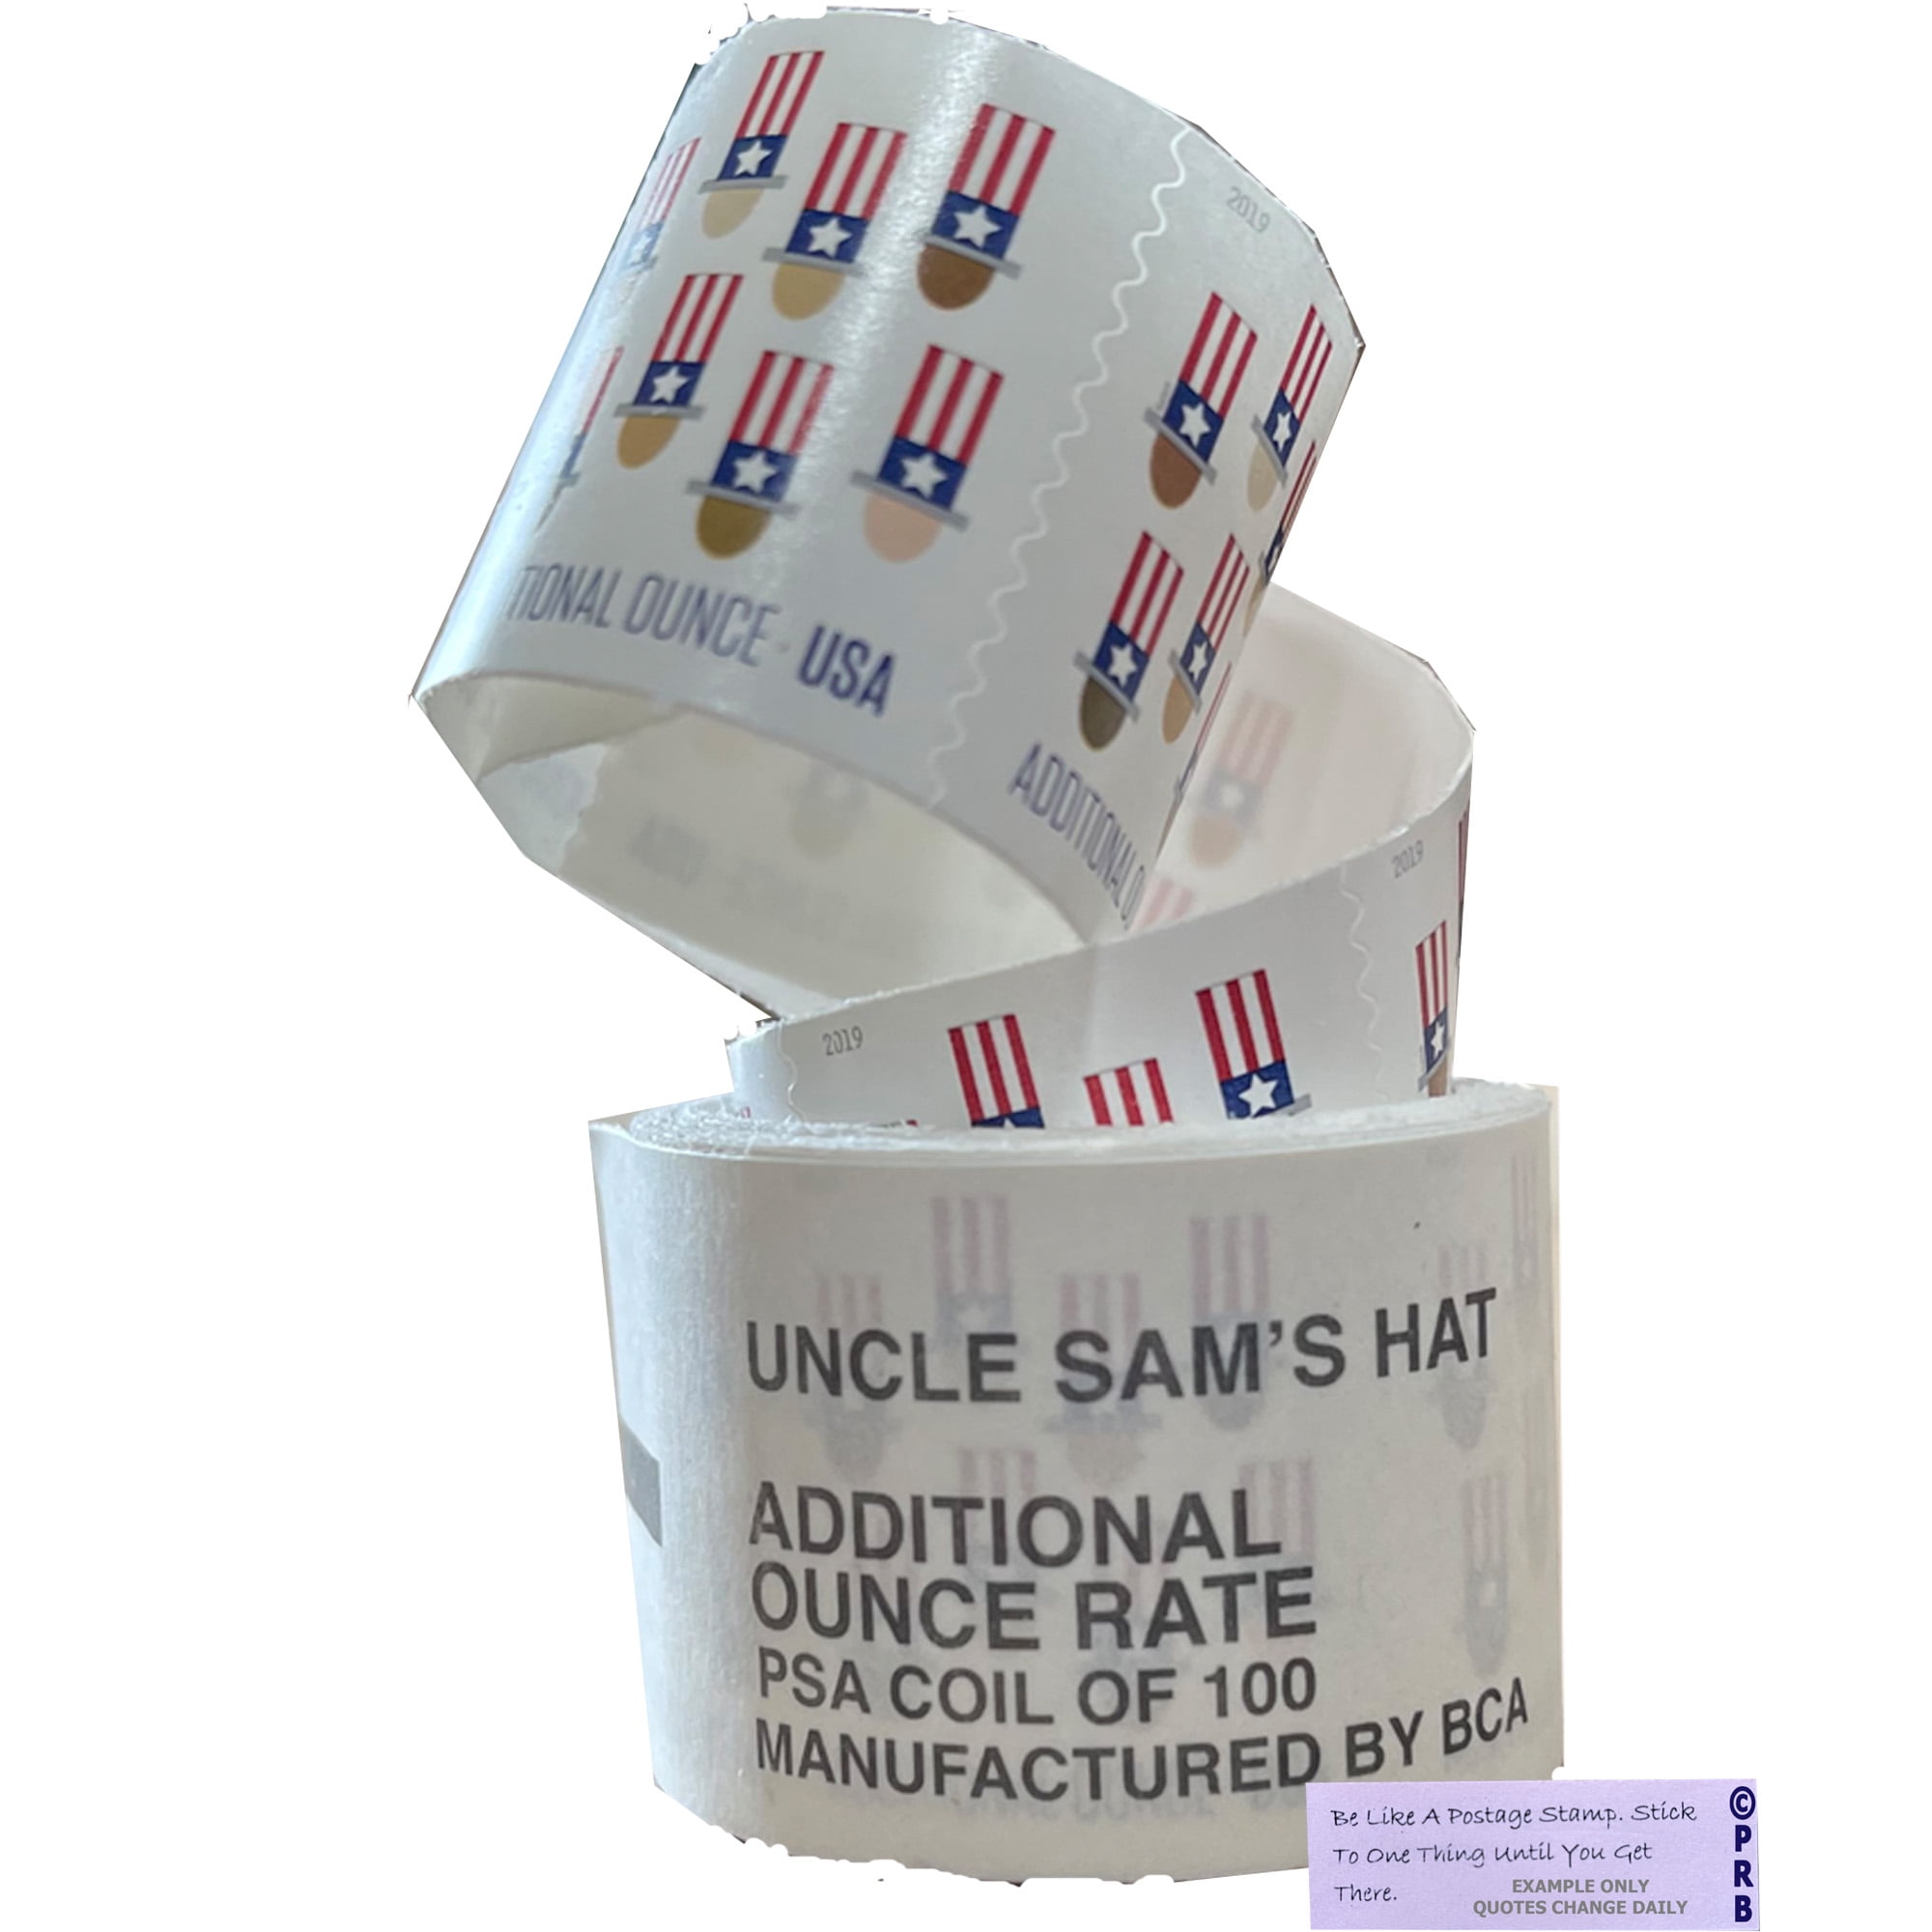 Uncle Sam’s Hat USPS ADDITIONAL Ounce Rate Postage Stamp 1 Roll/Coil of